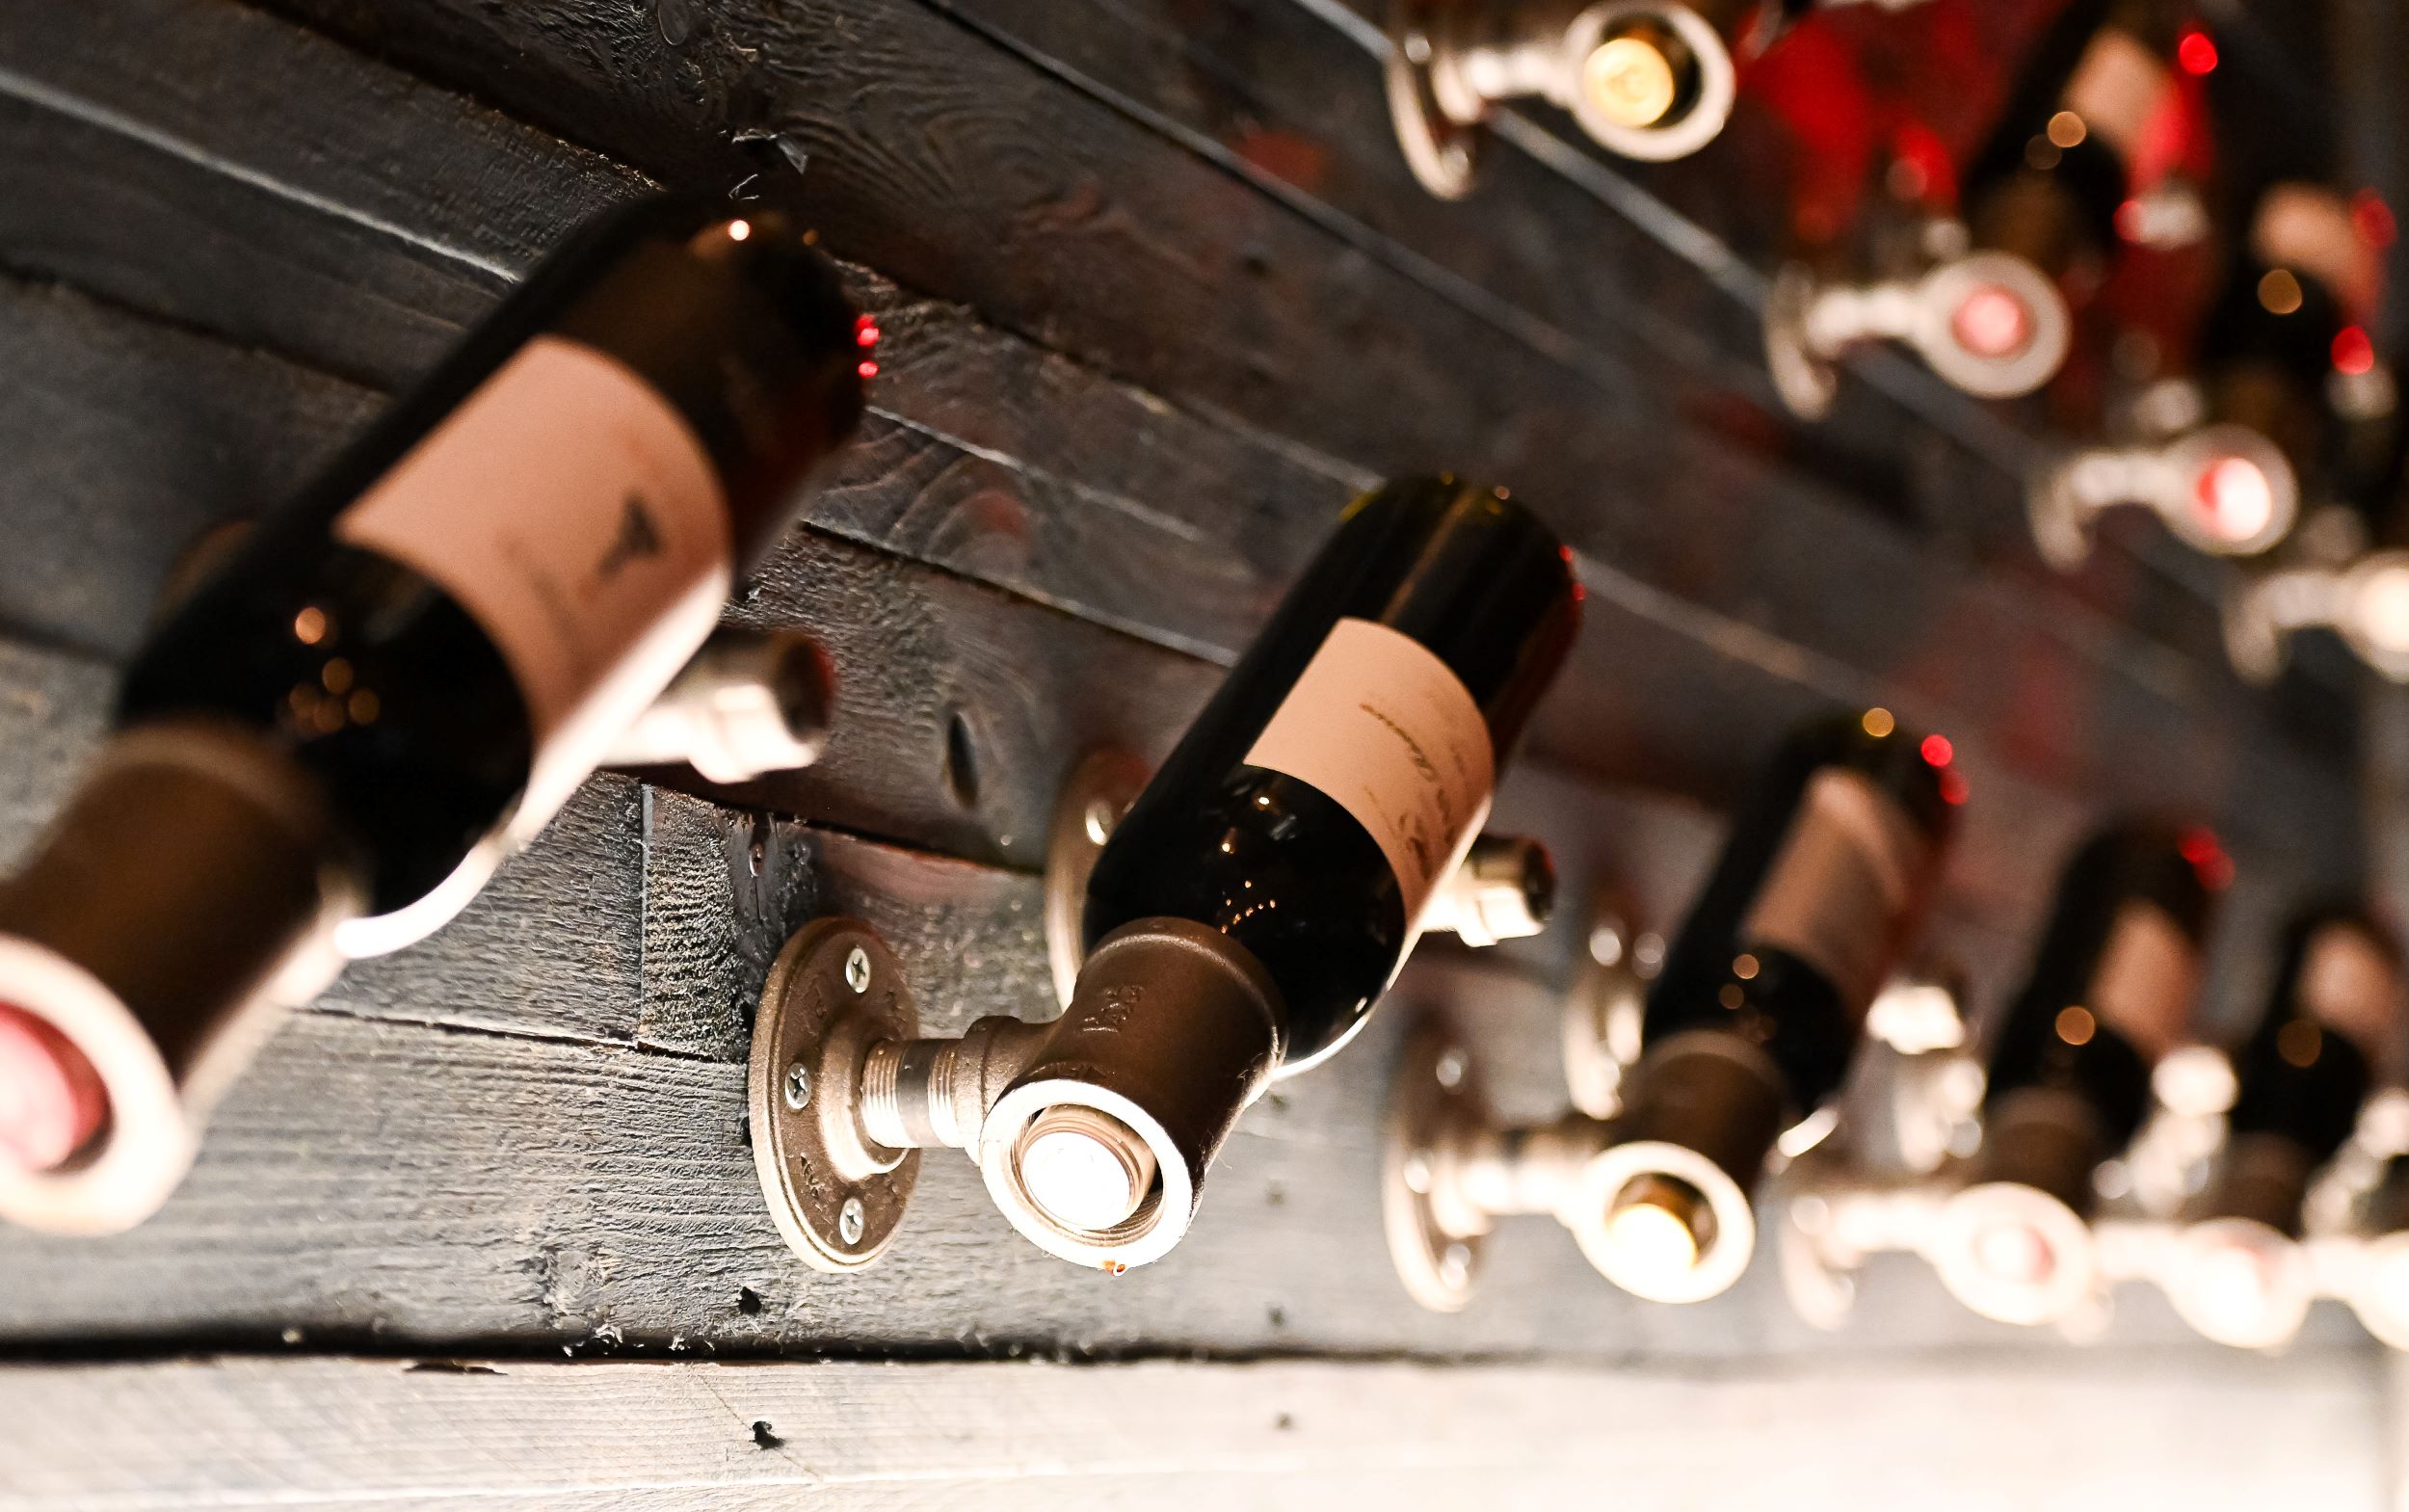 A display of wine bottles mounted diagonally in metal holders against a dark wooden wall, viewed from a low angle with a focus on the closest bottle.